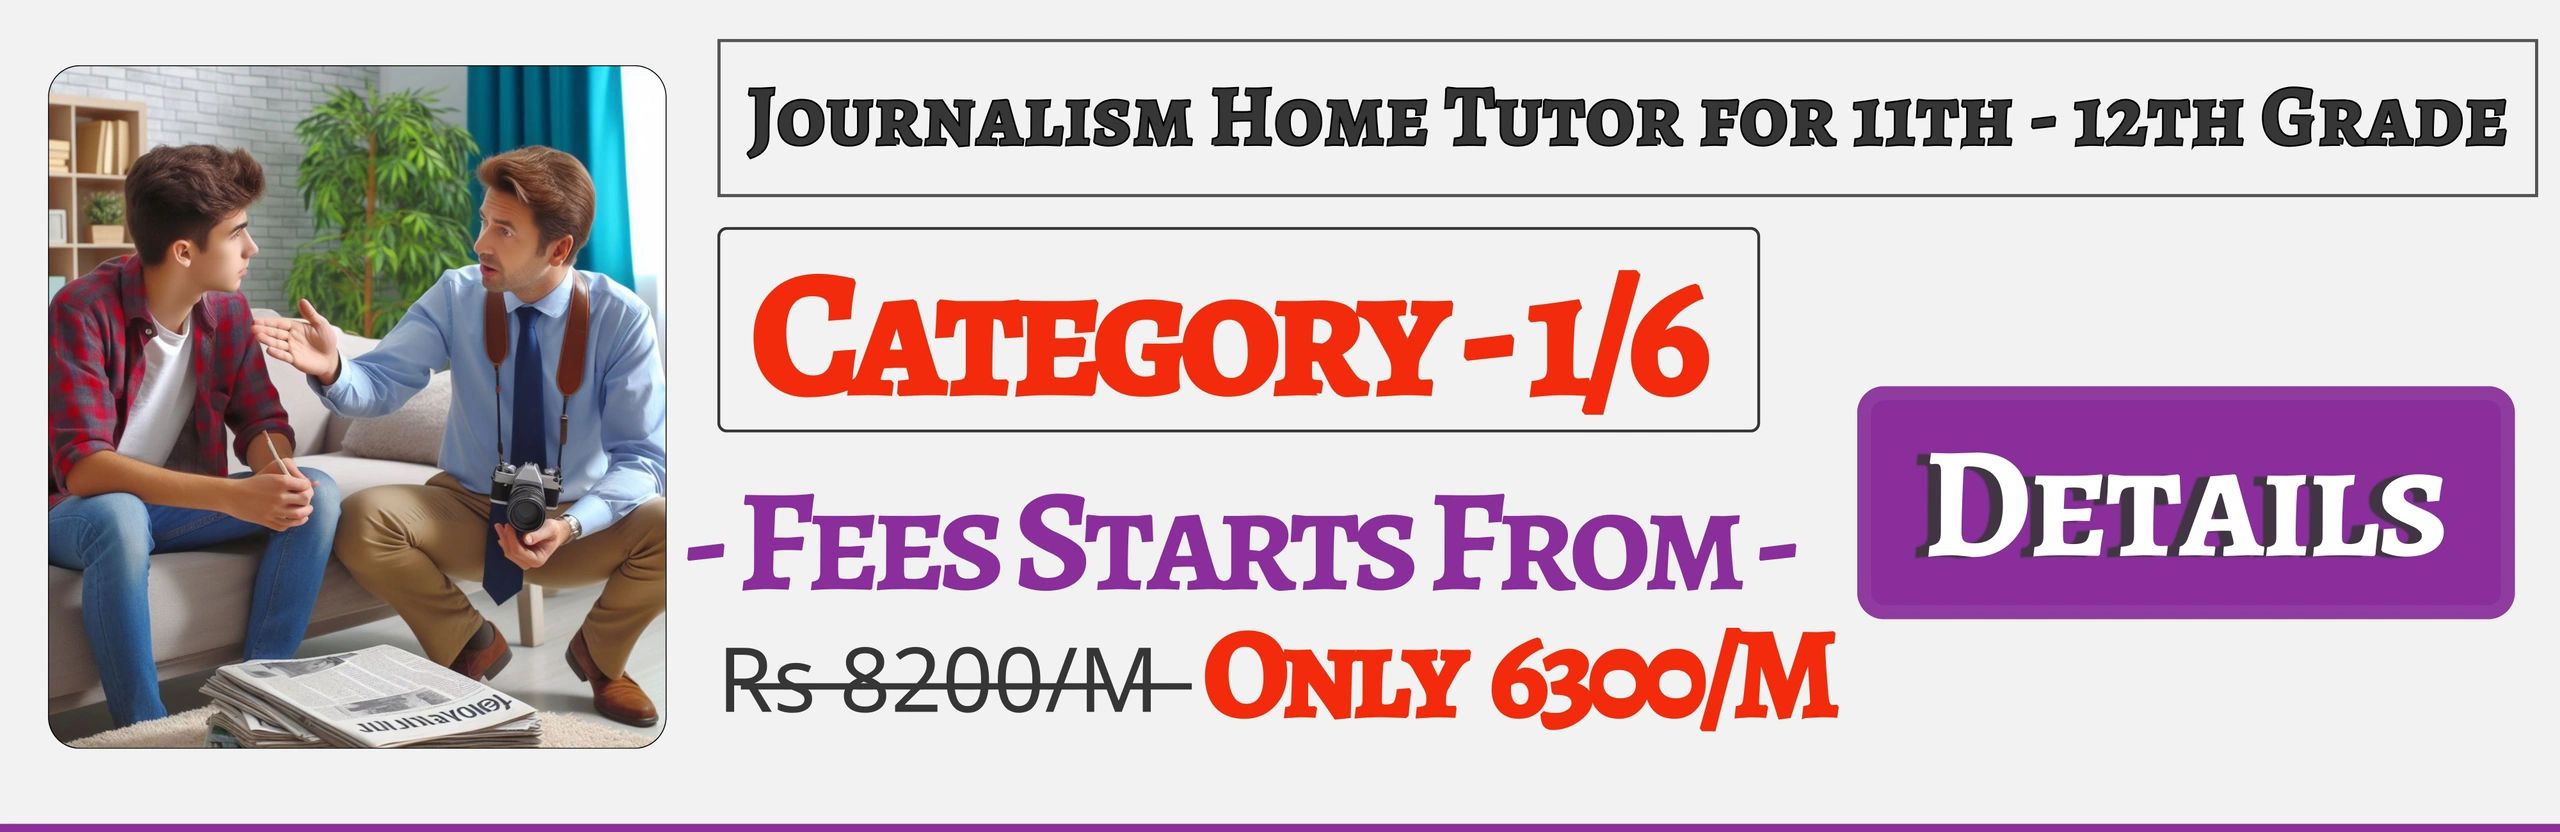 Book Best Nearby Journalism Home Tuition Tutors For 11th & 12th In Jaipur , Fees Only 6300/M